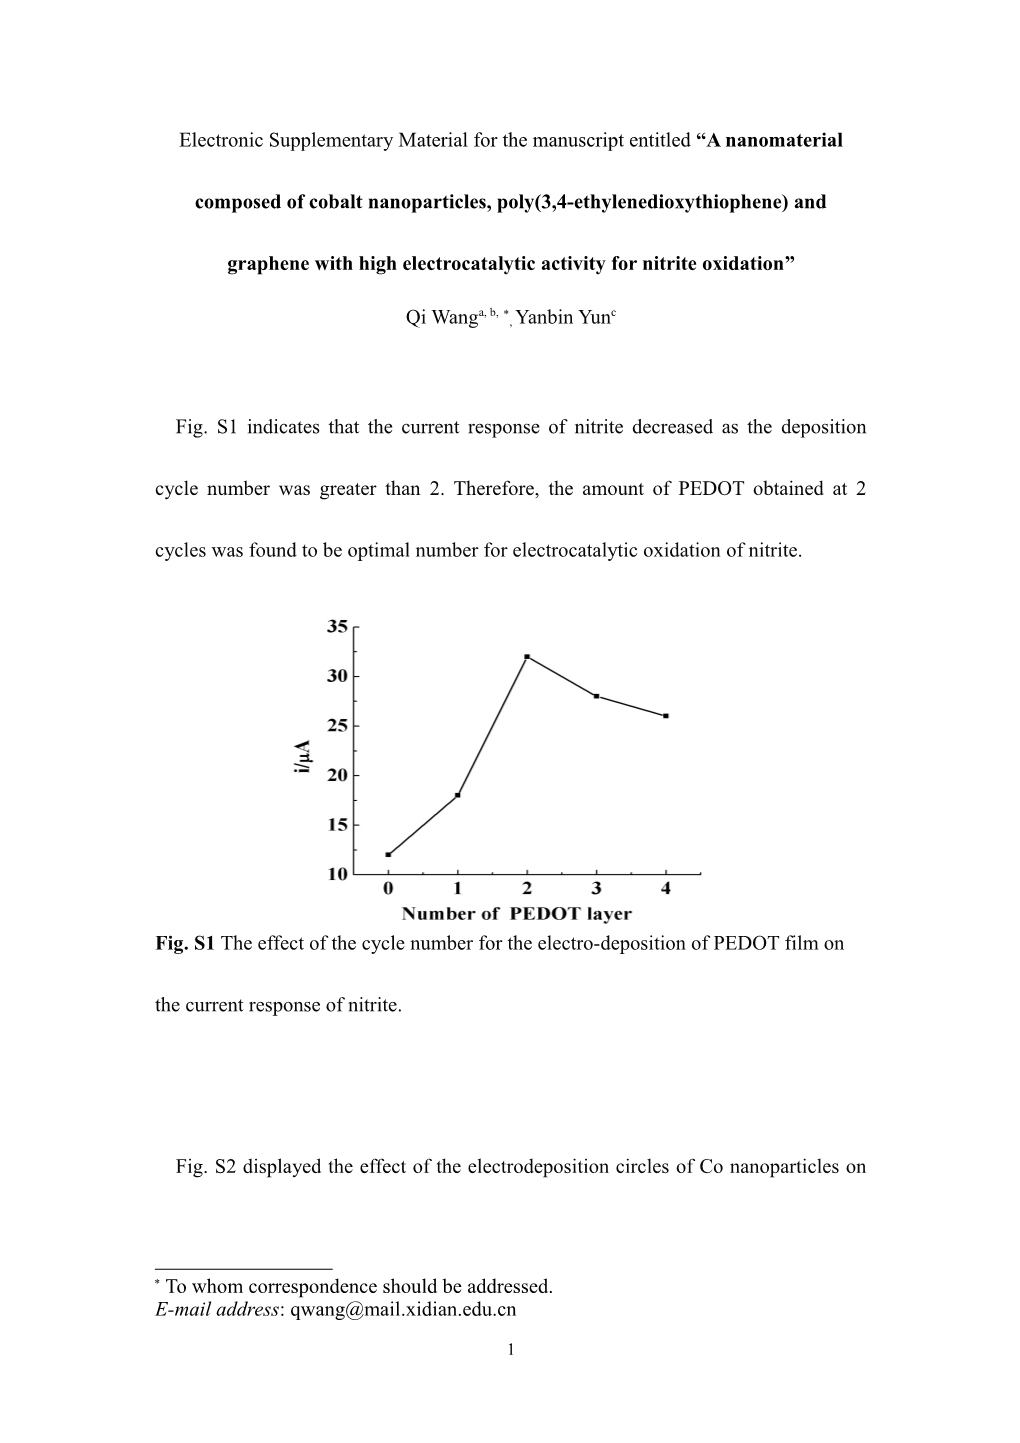 Electronic Supplementary Material for the Manuscript Entitled a Nanomaterial Composed Of